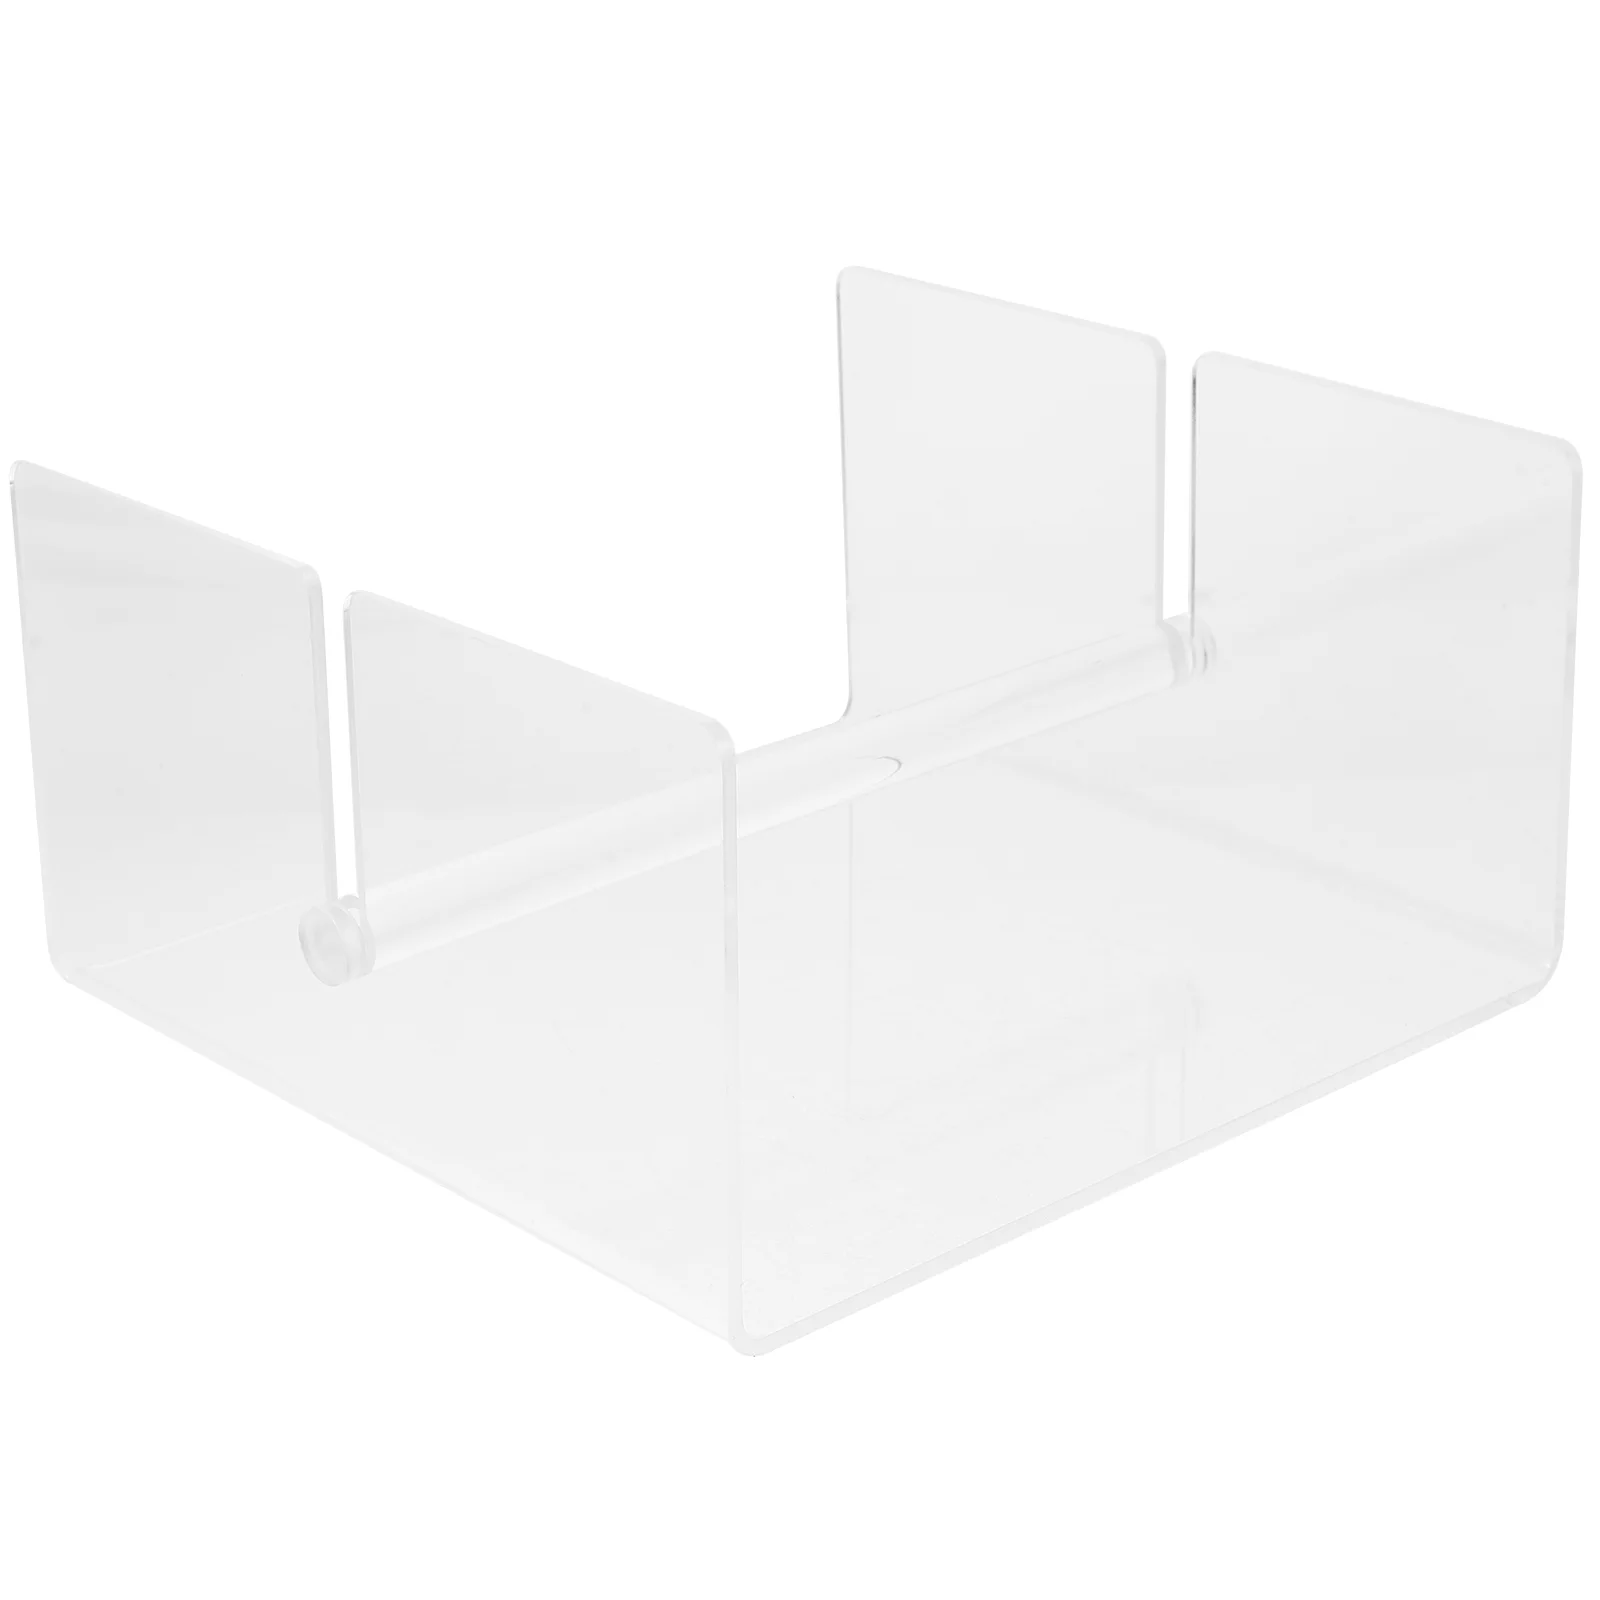 

Carton Paper Napkin Holder Guest Towel Tray Indoor Restaurant Accessory Table Desktop Acrylic Napkins Dining Tissue Container